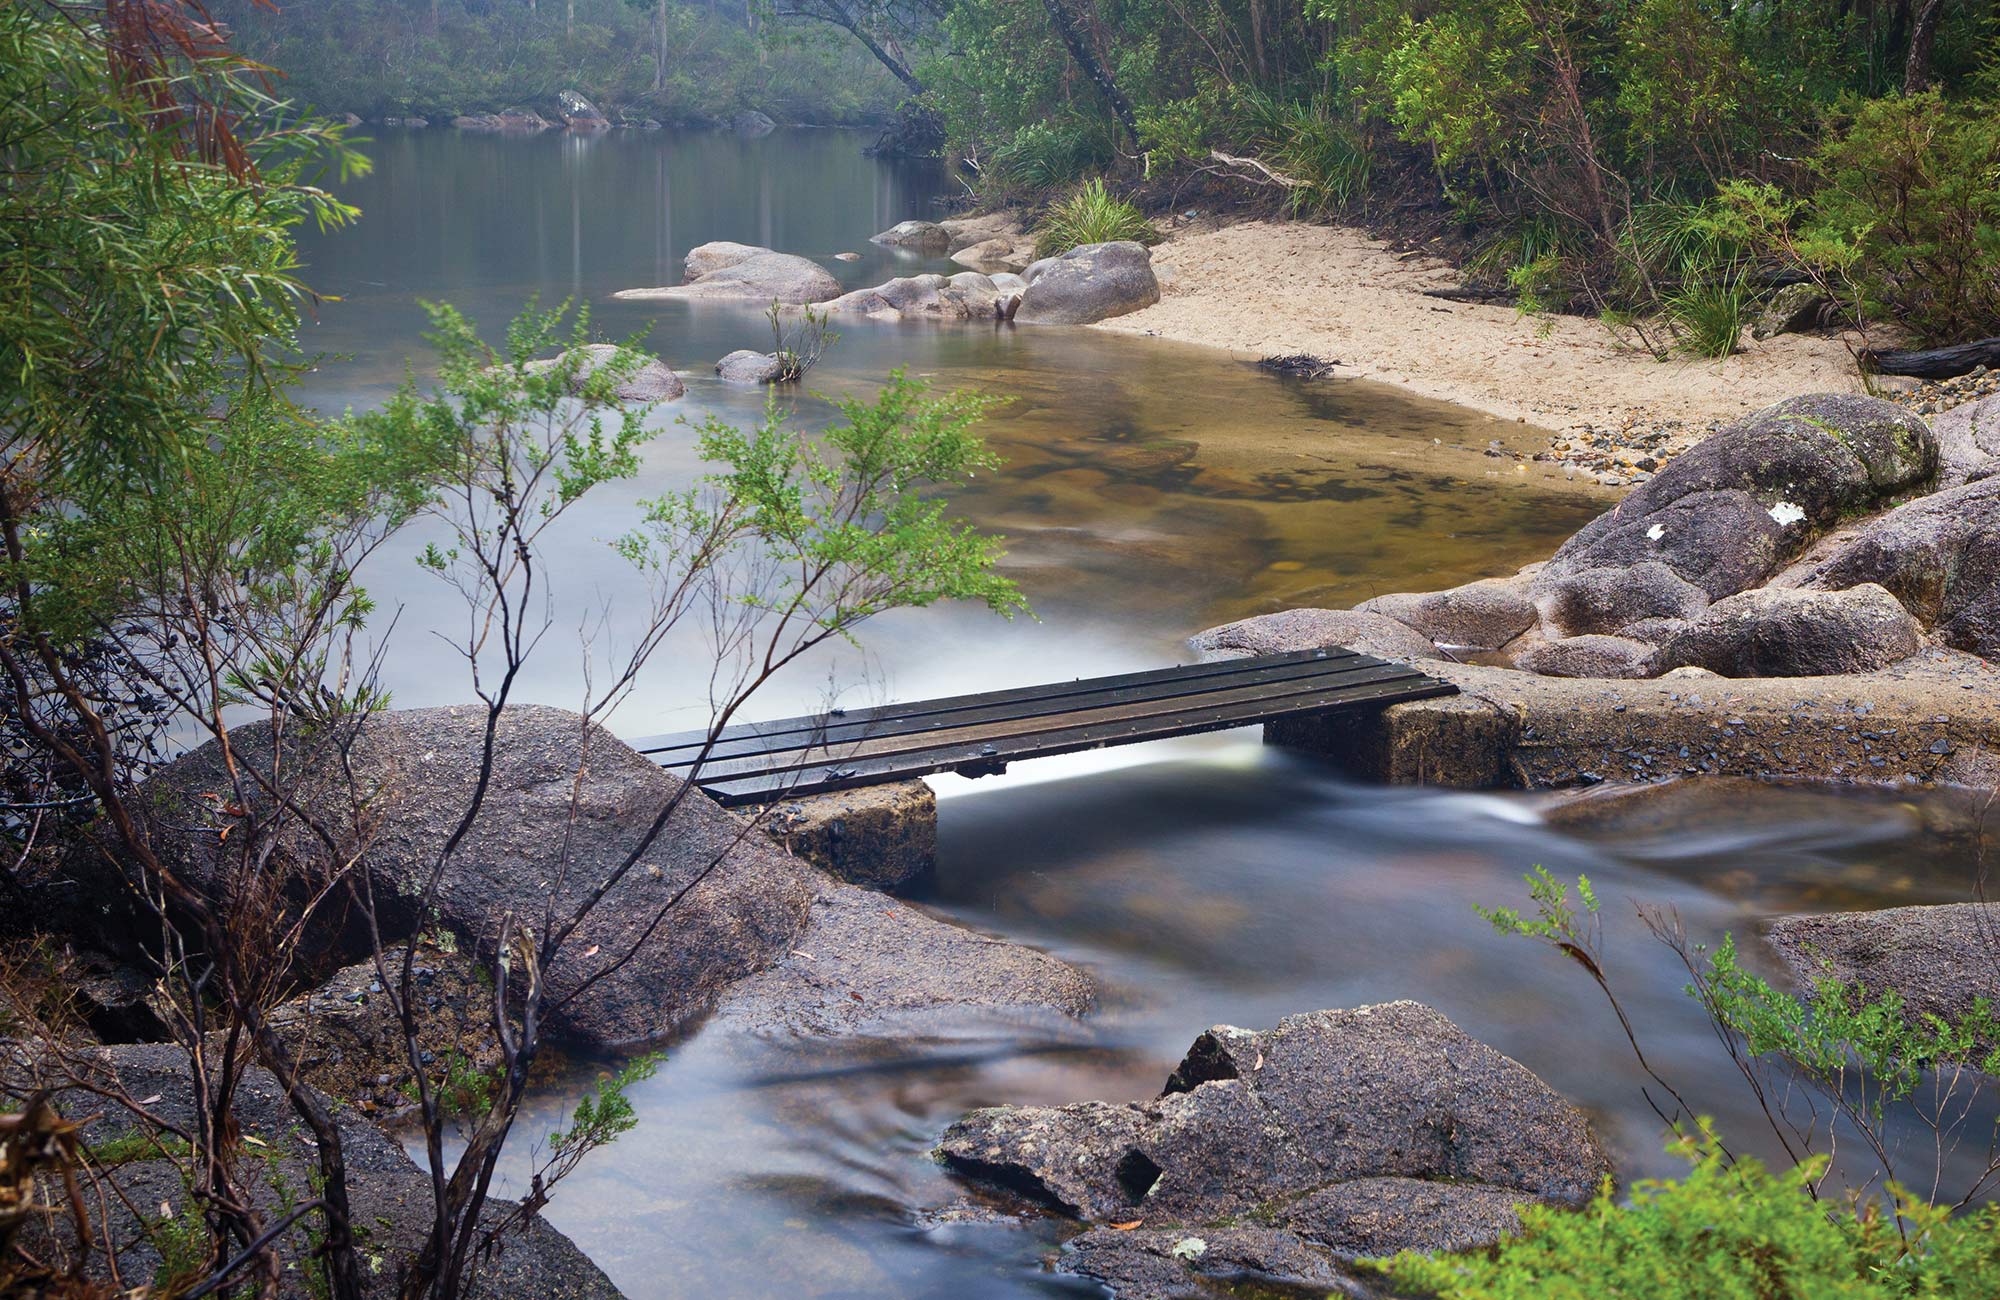 Mulligan's Weir, Gibraltar Ranges National Park. Photo: Rob Cleary/Seen Australia